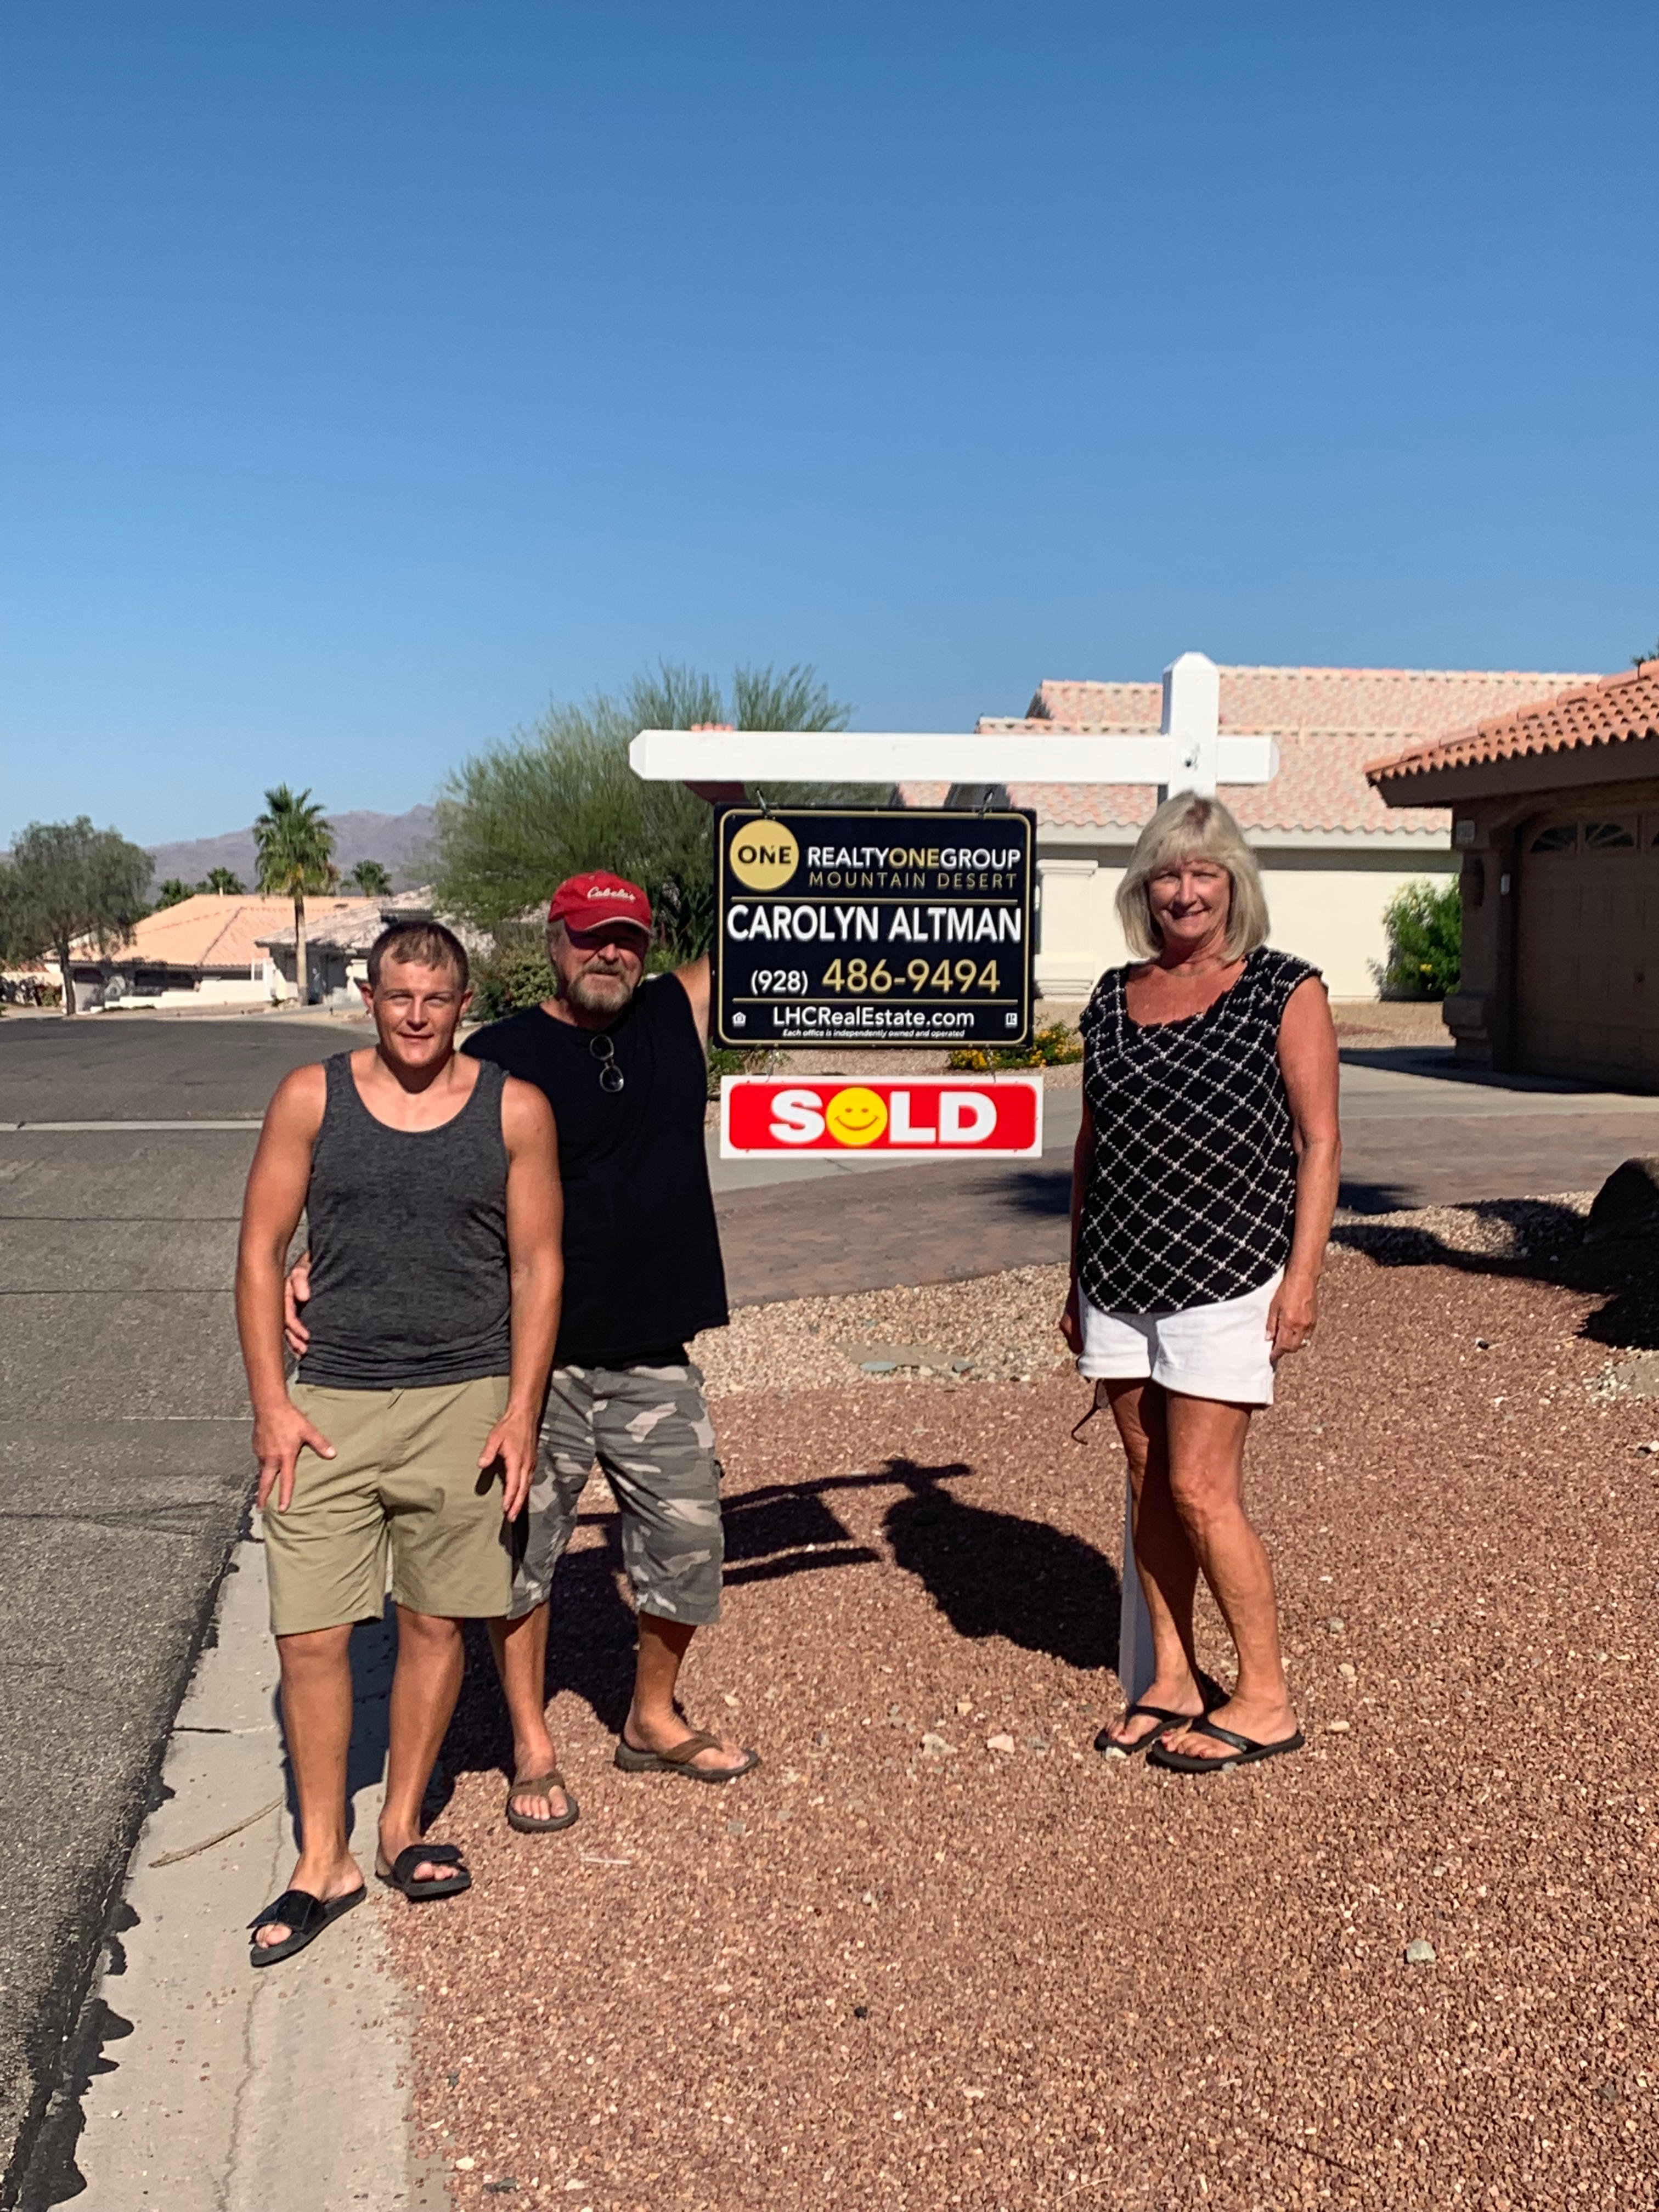 Looking for a trusted home builder in Bullhead City? With nearly 300 five-star reviews online, you can trust us to help you every step of the way.